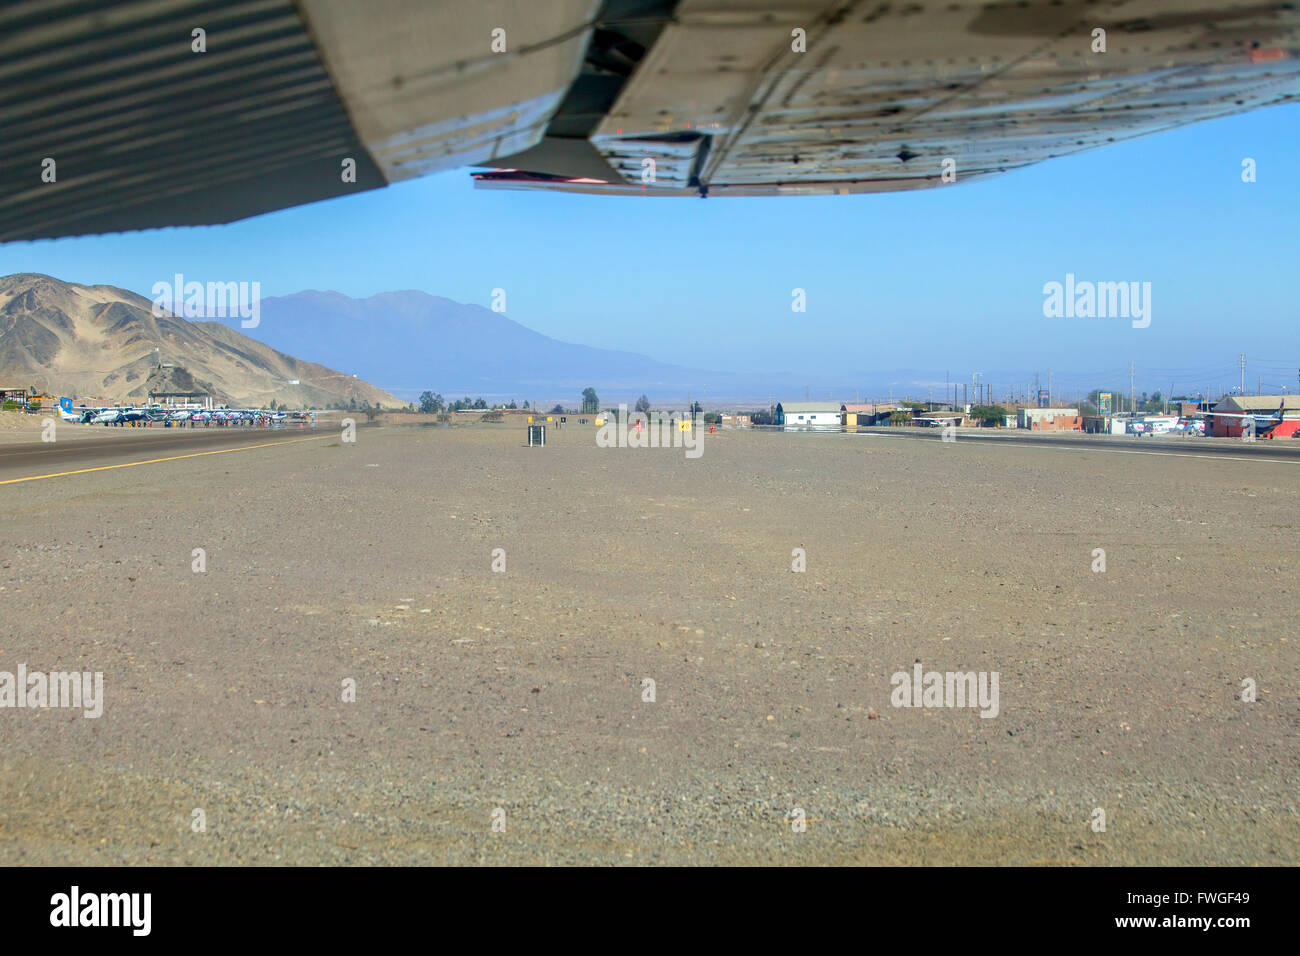 Airstrip of a small airport in Peru Stock Photo